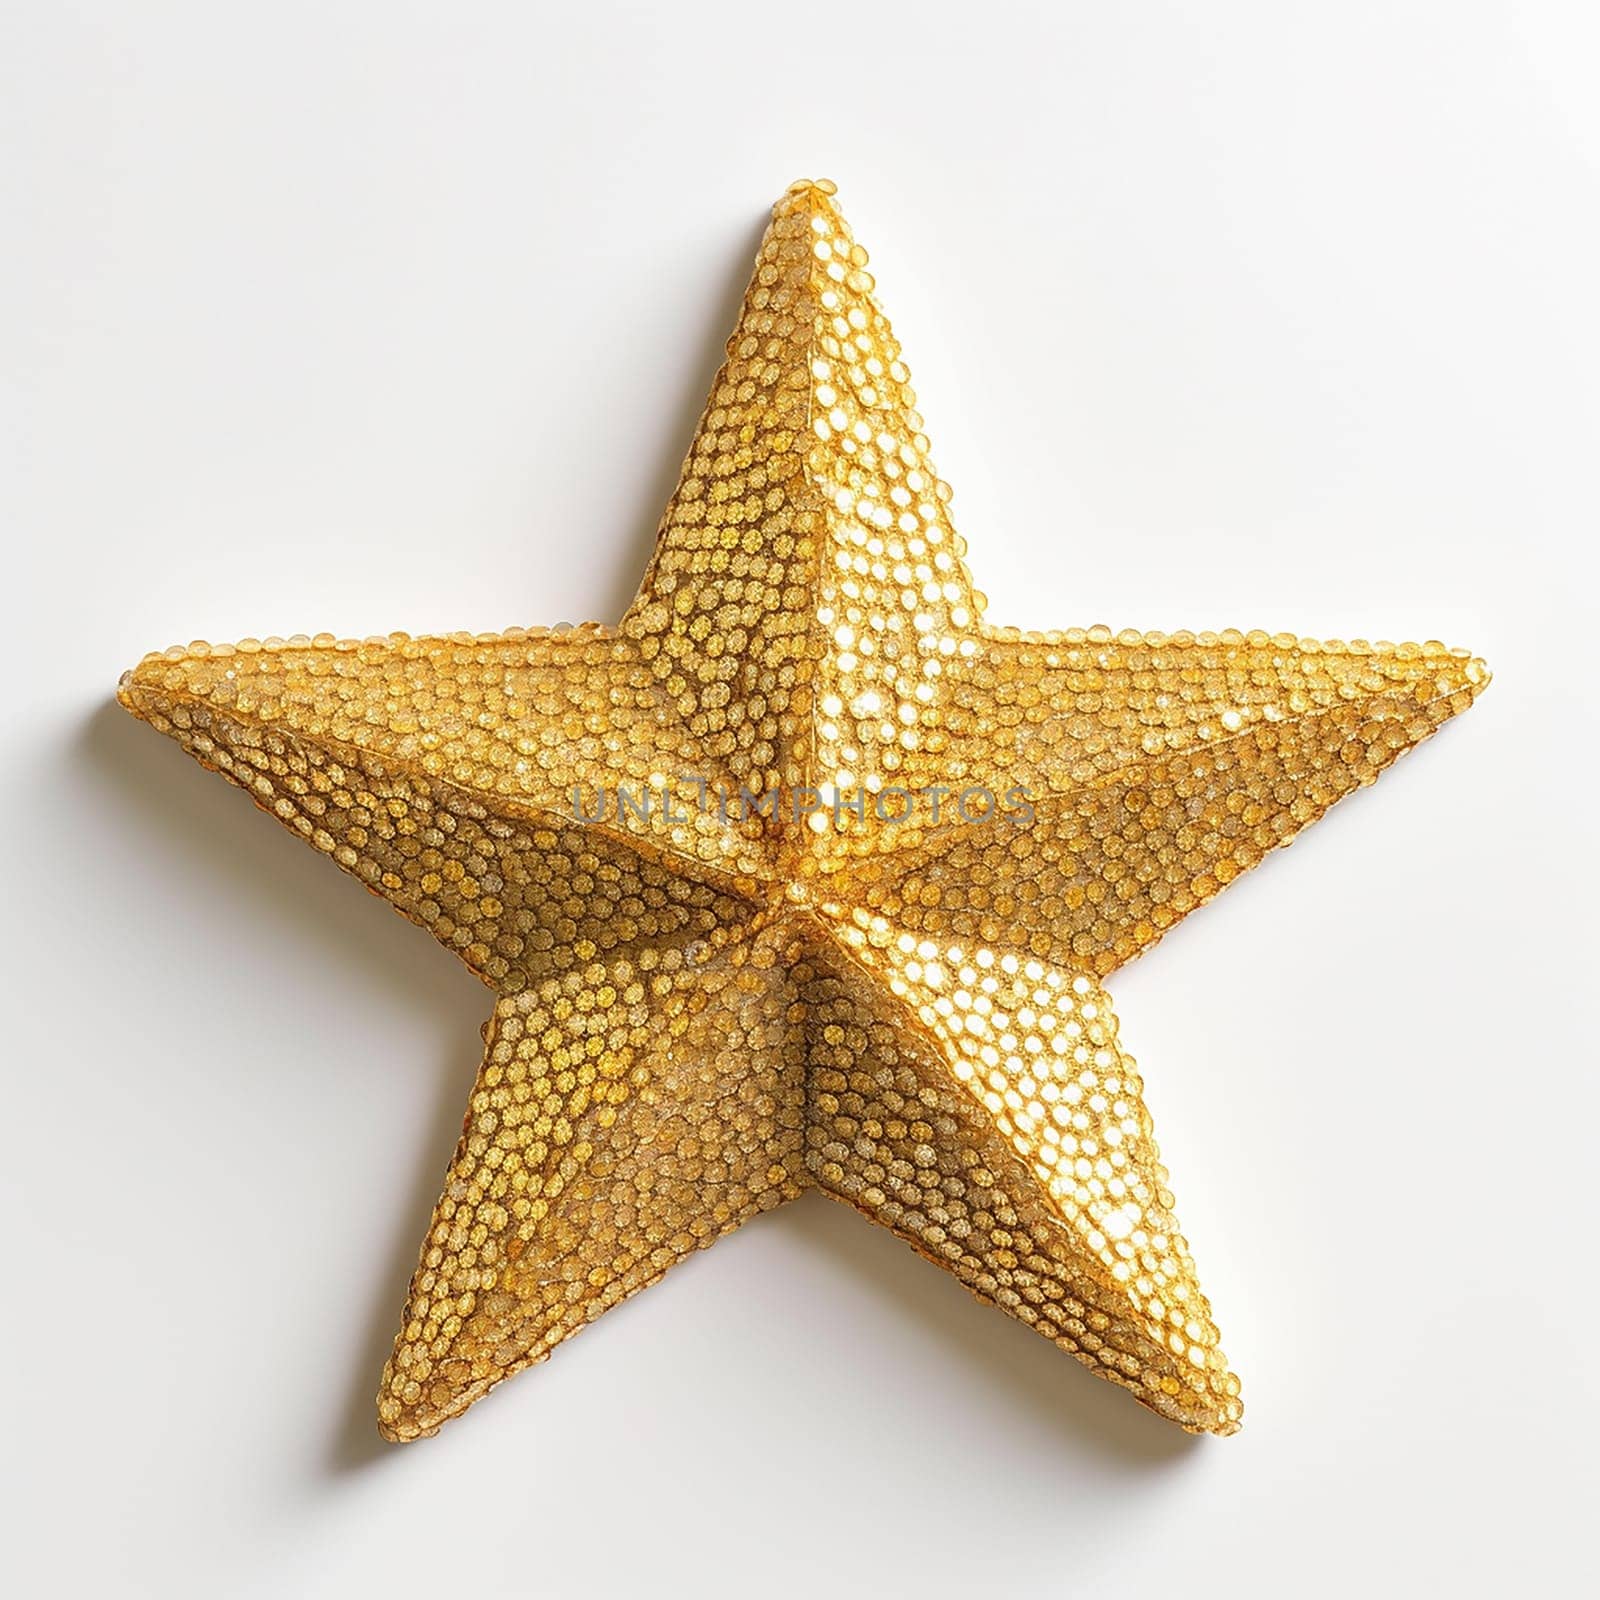 Golden starfish isolated on a white background, natural symmetry and texture.